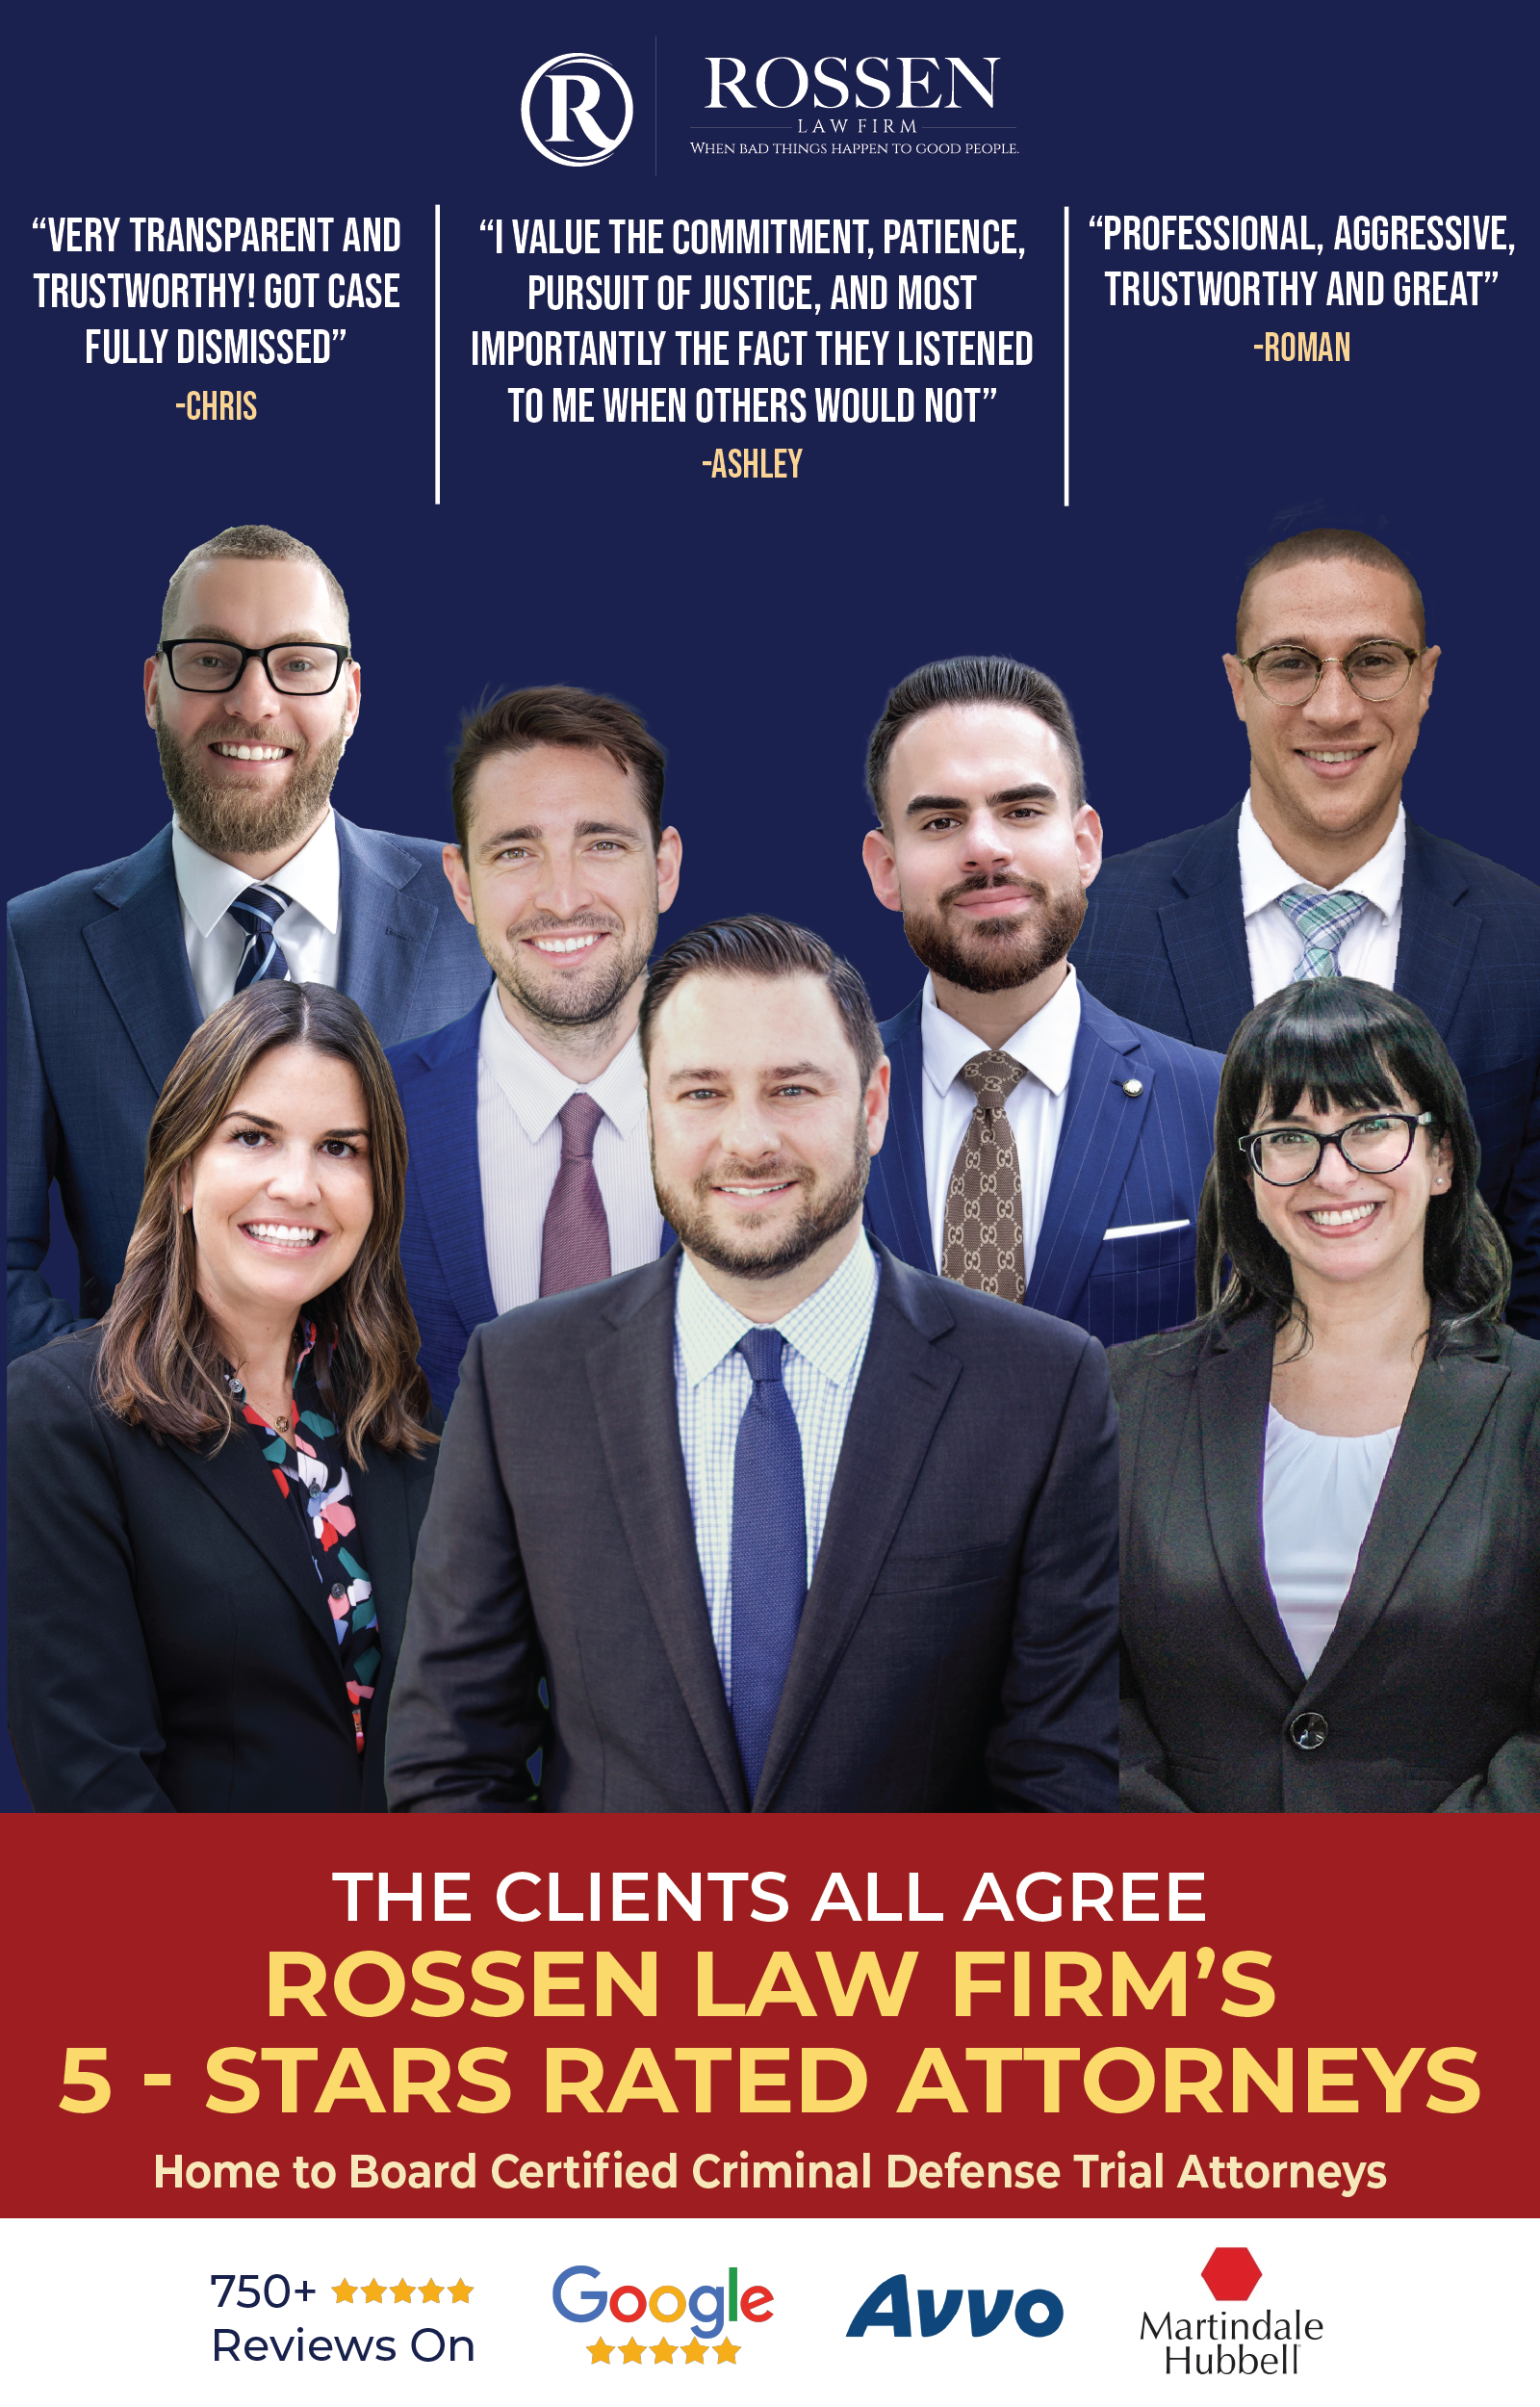 The Client All Agree Rossen Law Firms’s 5- Stars Rated Attorneys